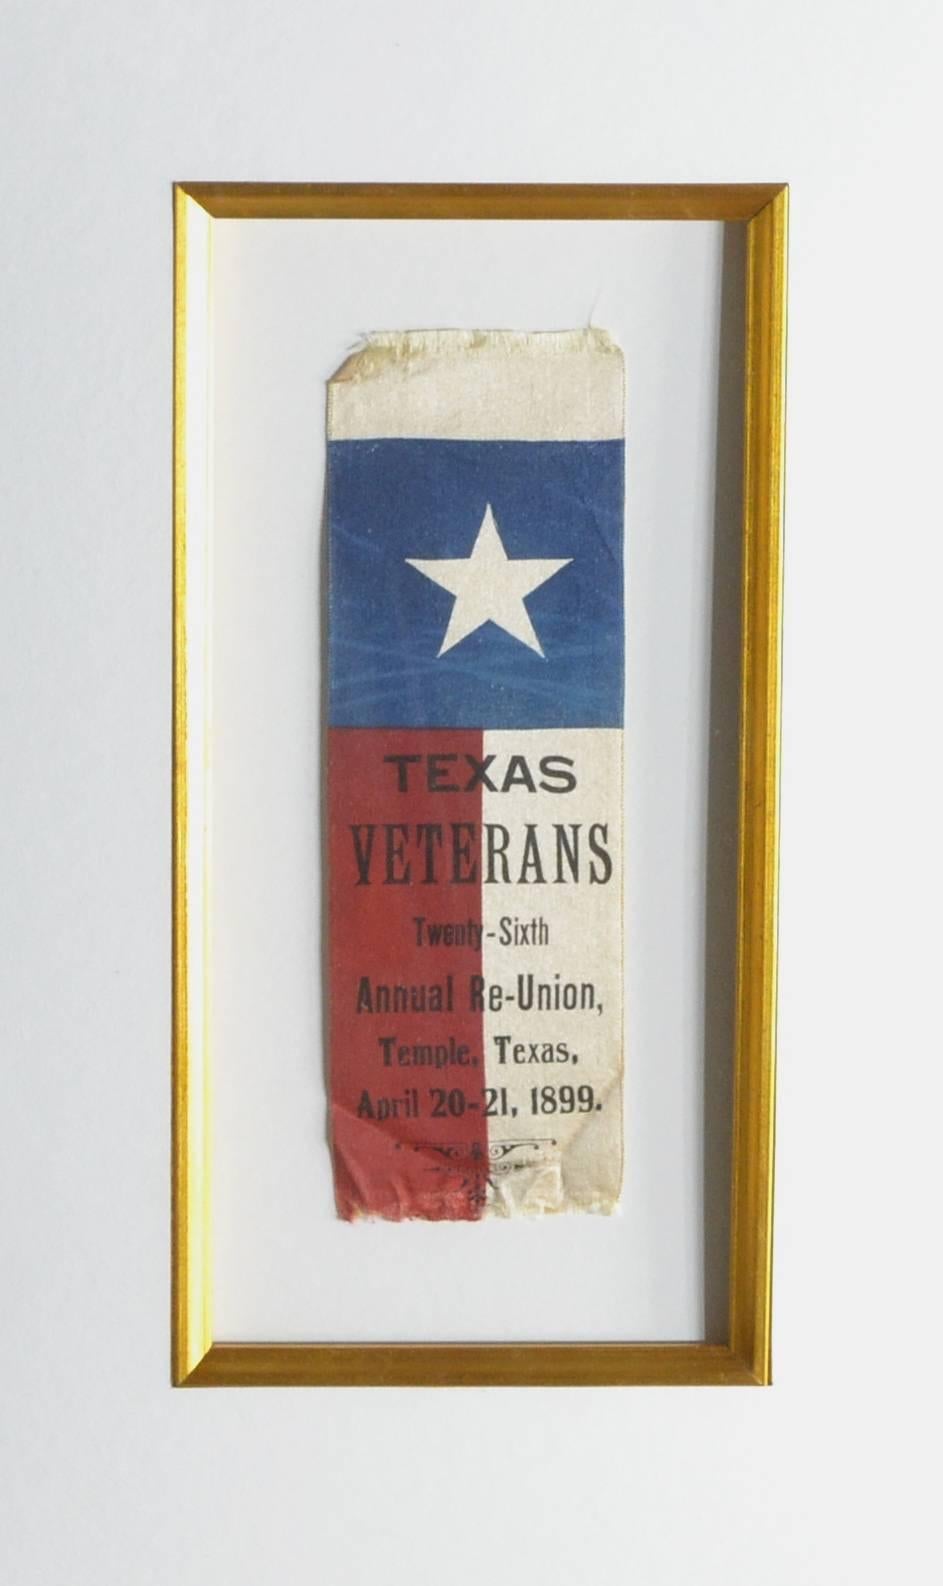 The war between Texas and Mexico to create the Republic of Texas was in 1836. Texas became its own Independent country from 1836-1845 with its own congress and elected Presidents. The brave men, veterans who fought in the war to create the Republic